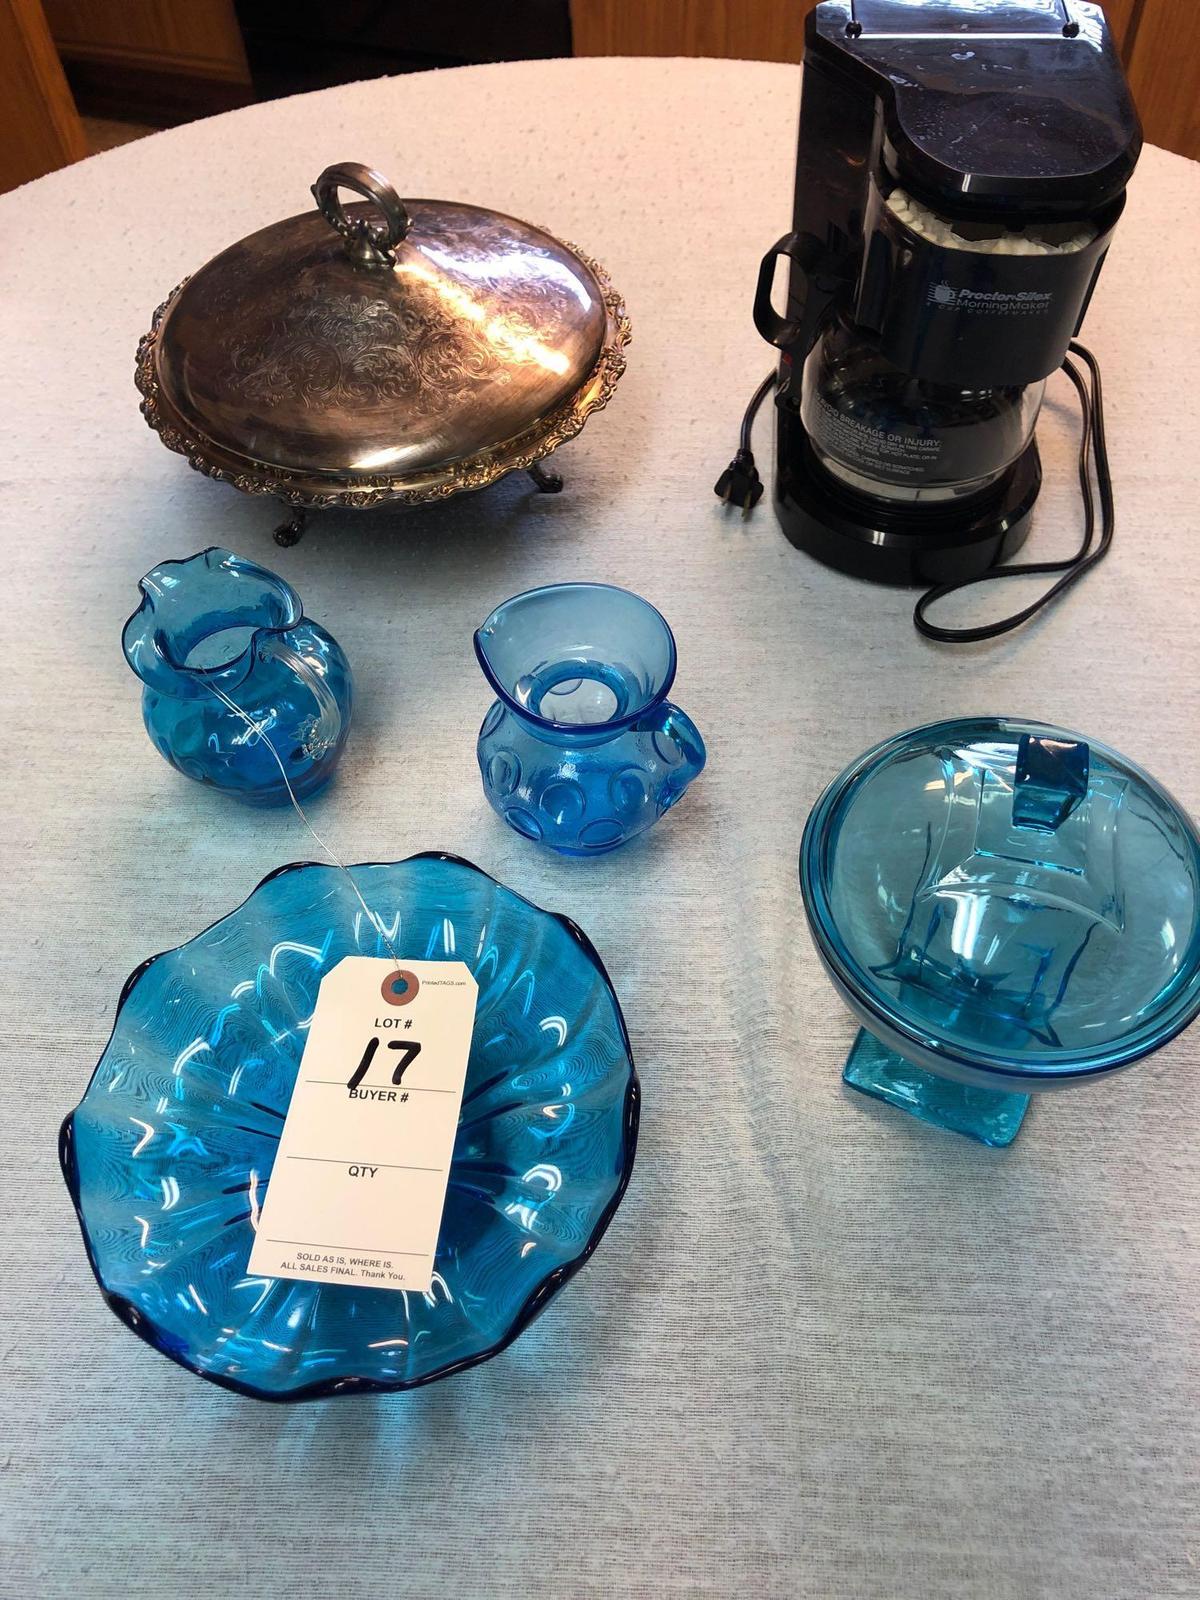 Assortment incl. Mini Coffee Maker, Blue Glass Items, and Metal Covered Candy Dish